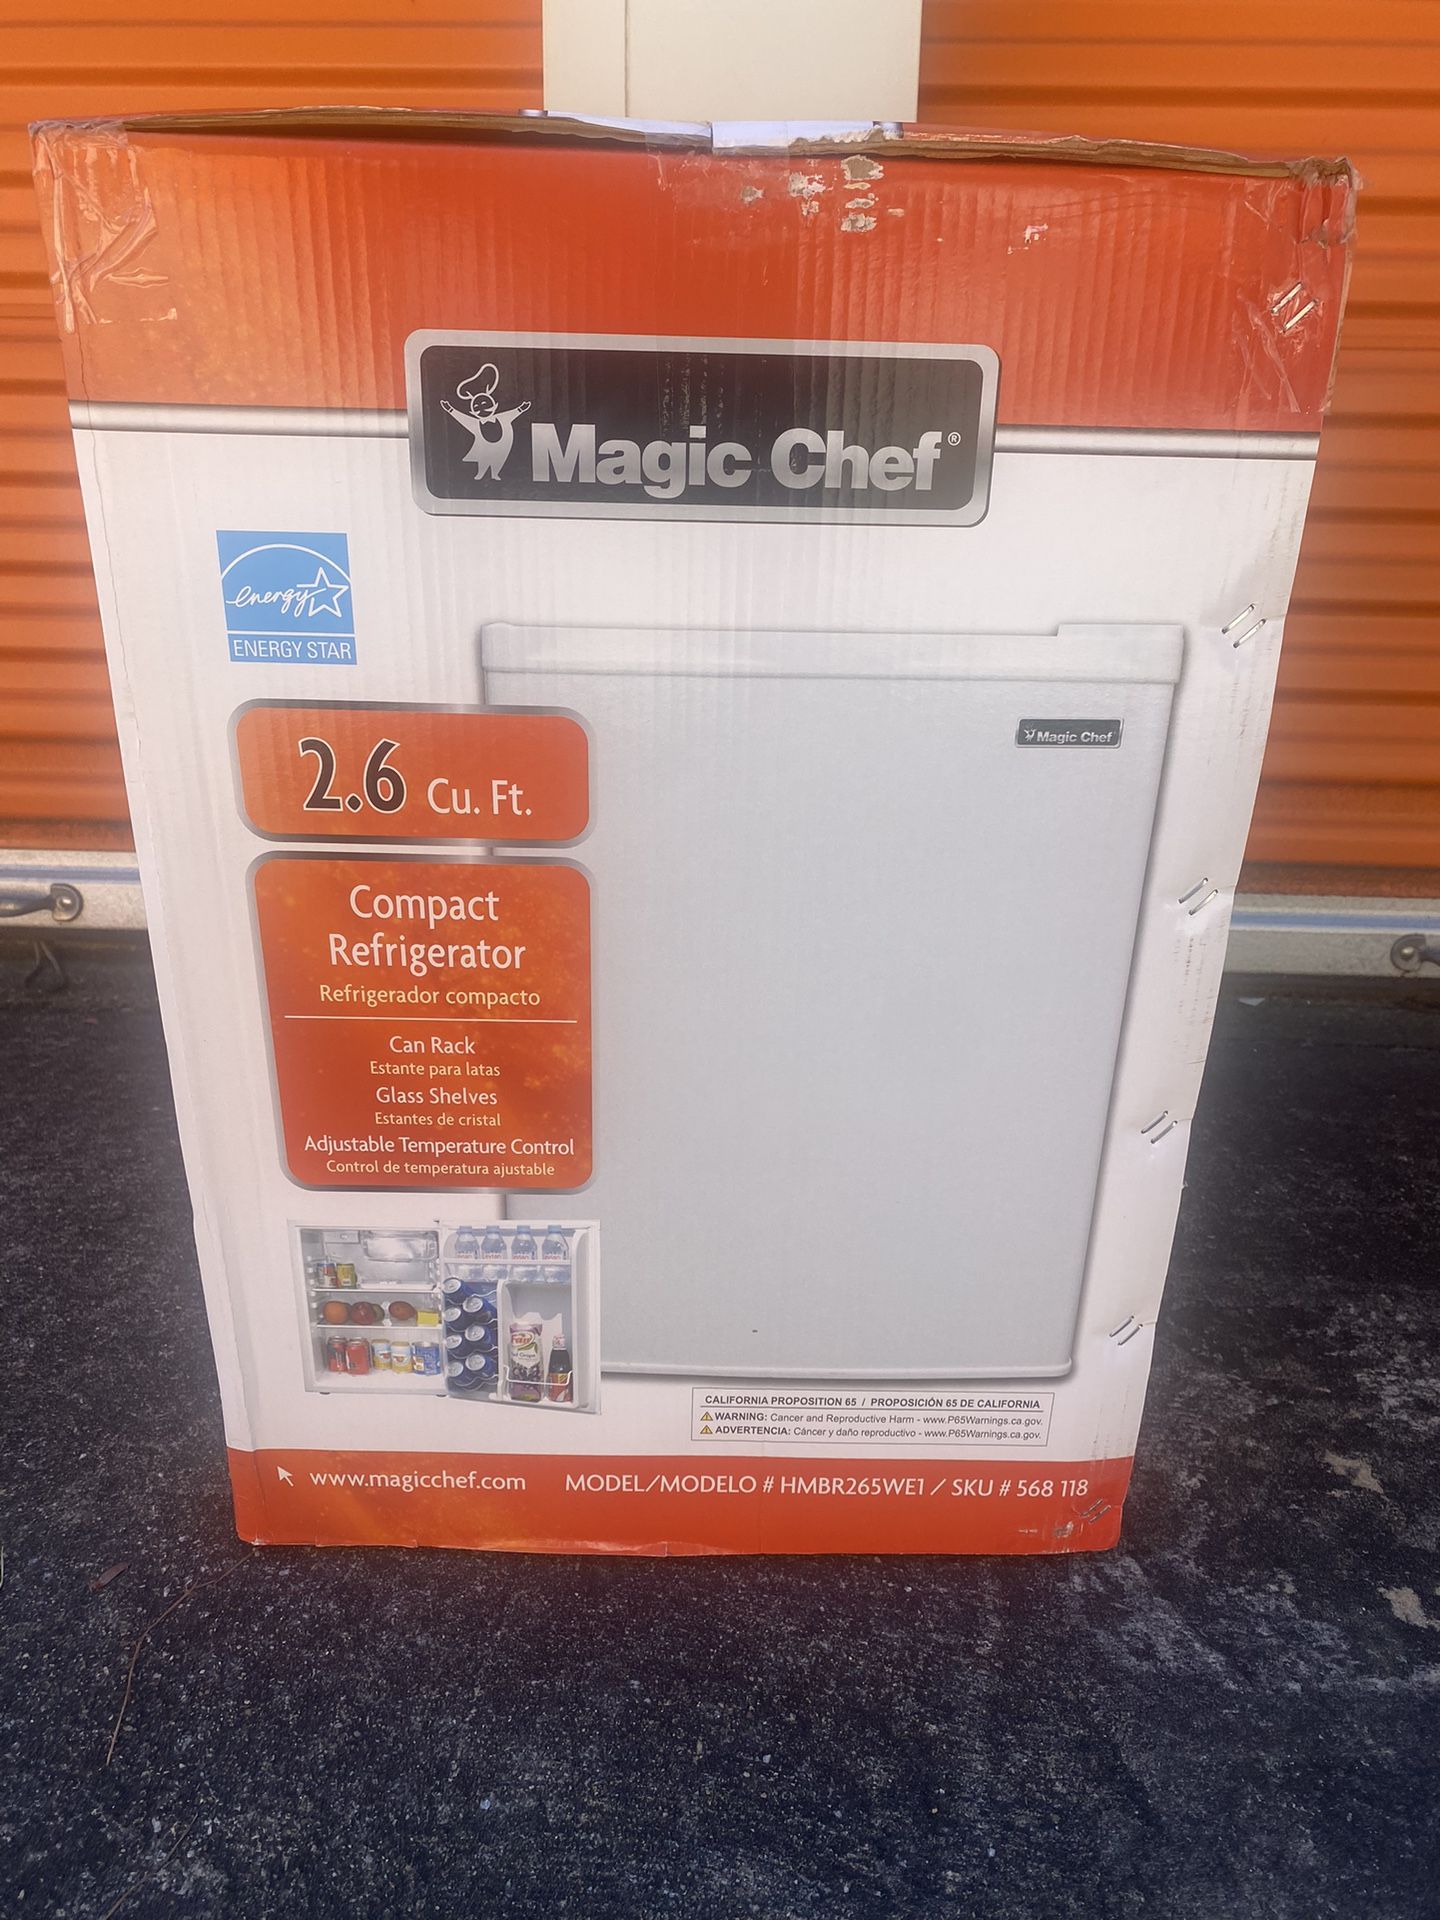 Multiple New 2.6 cu.ft. Magic Chef Compact Mini Fridge With Freezer ( White in color)$100 each 